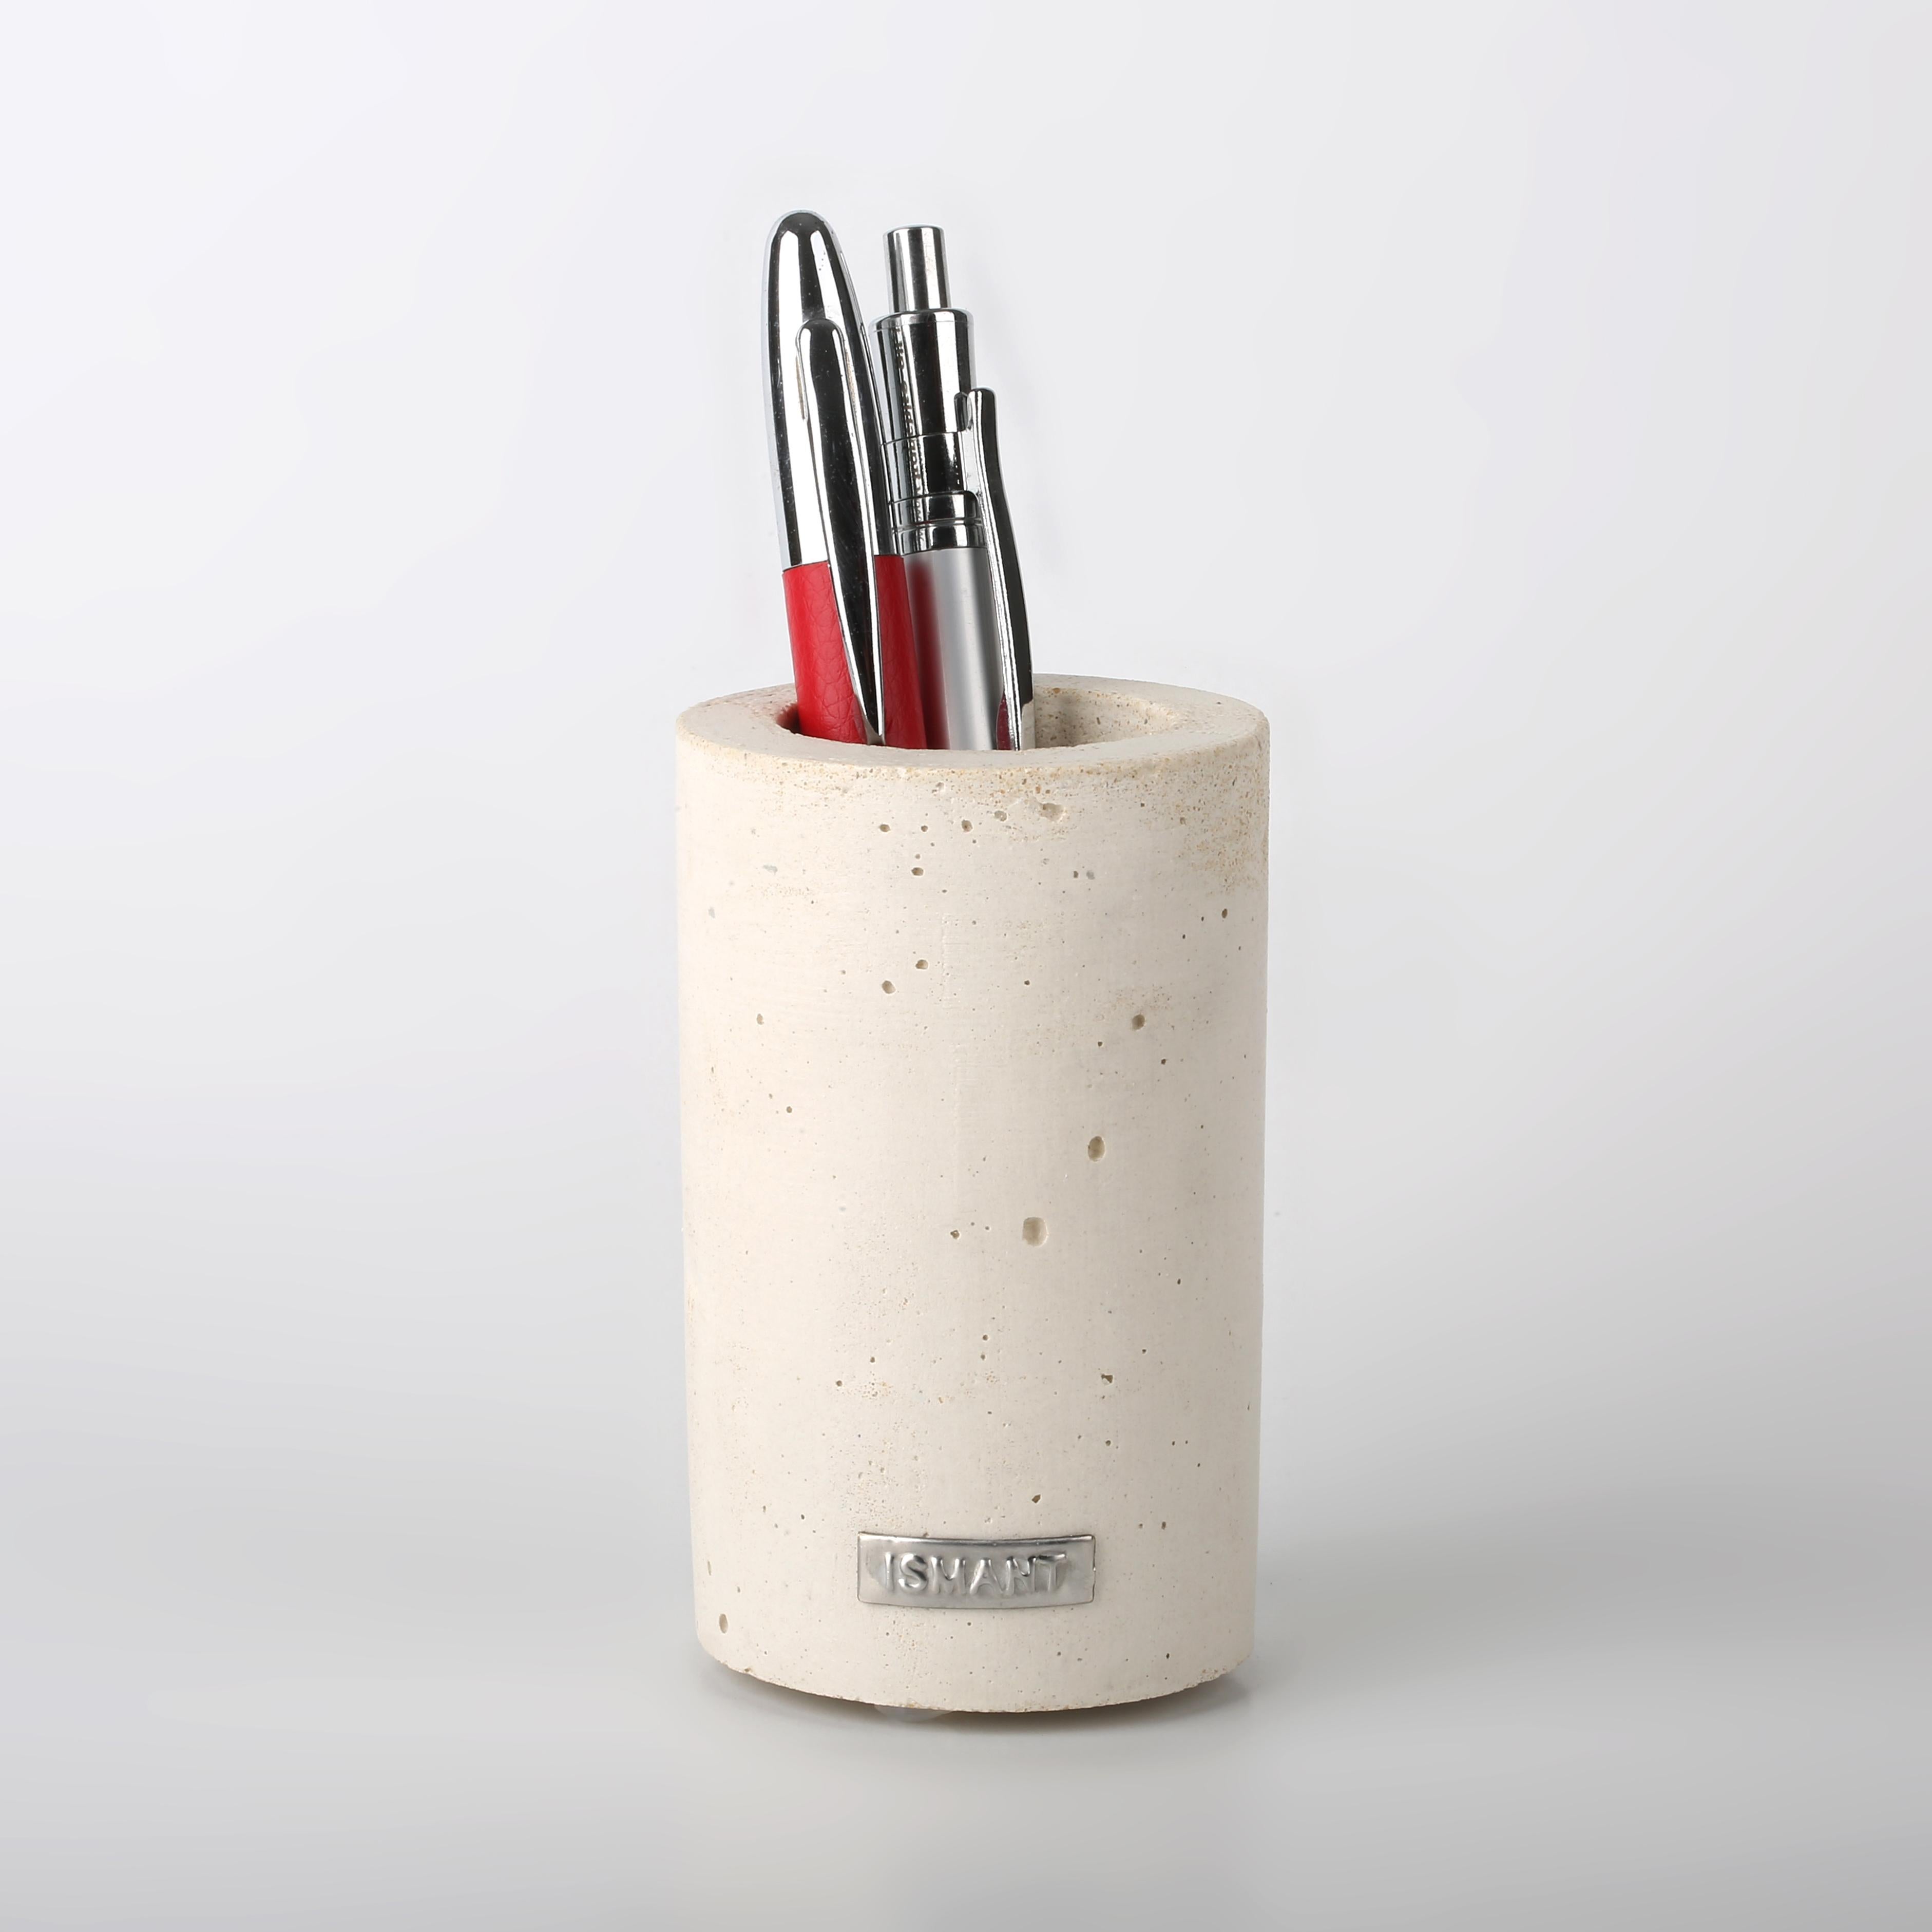 Introducing our Multi-Purpose Concrete Holder, a versatile piece that transcends its original design. While it excels at keeping your pens in order, its functionality extends far beyond. This adaptable accessory can effortlessly serve as a